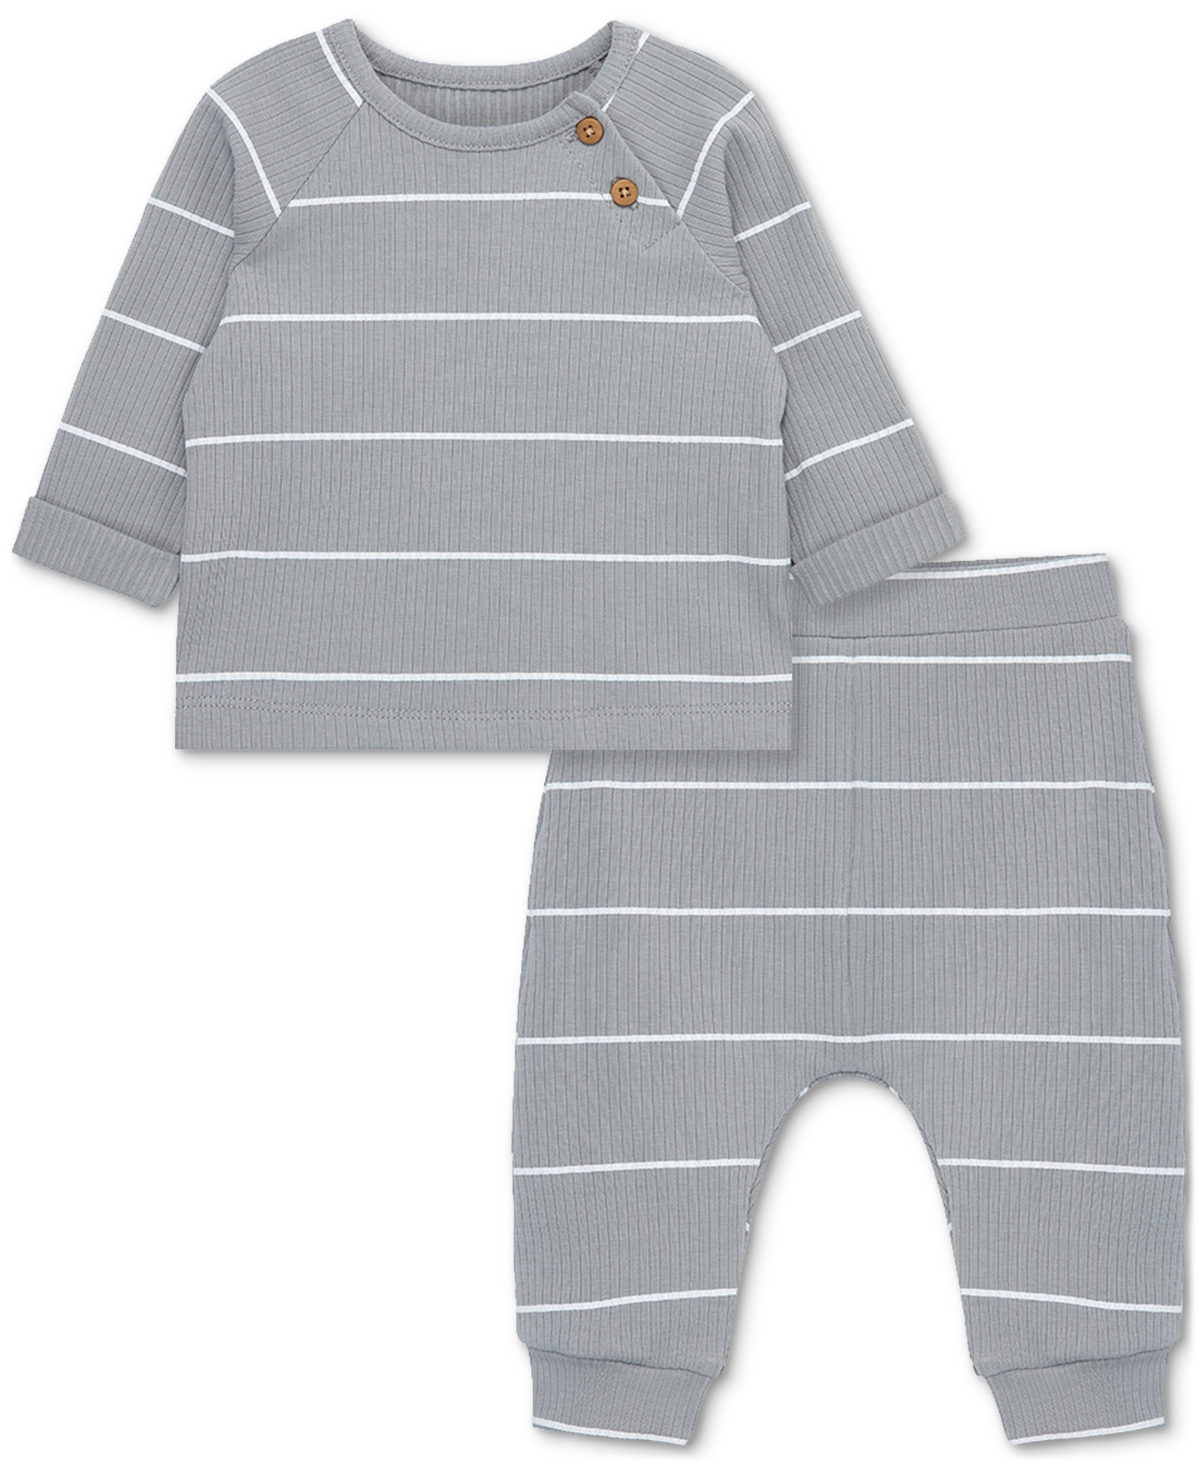 Focus Baby Striped Long Sleeve Top And Pull-on Pants, 2 Piece Set In Gray